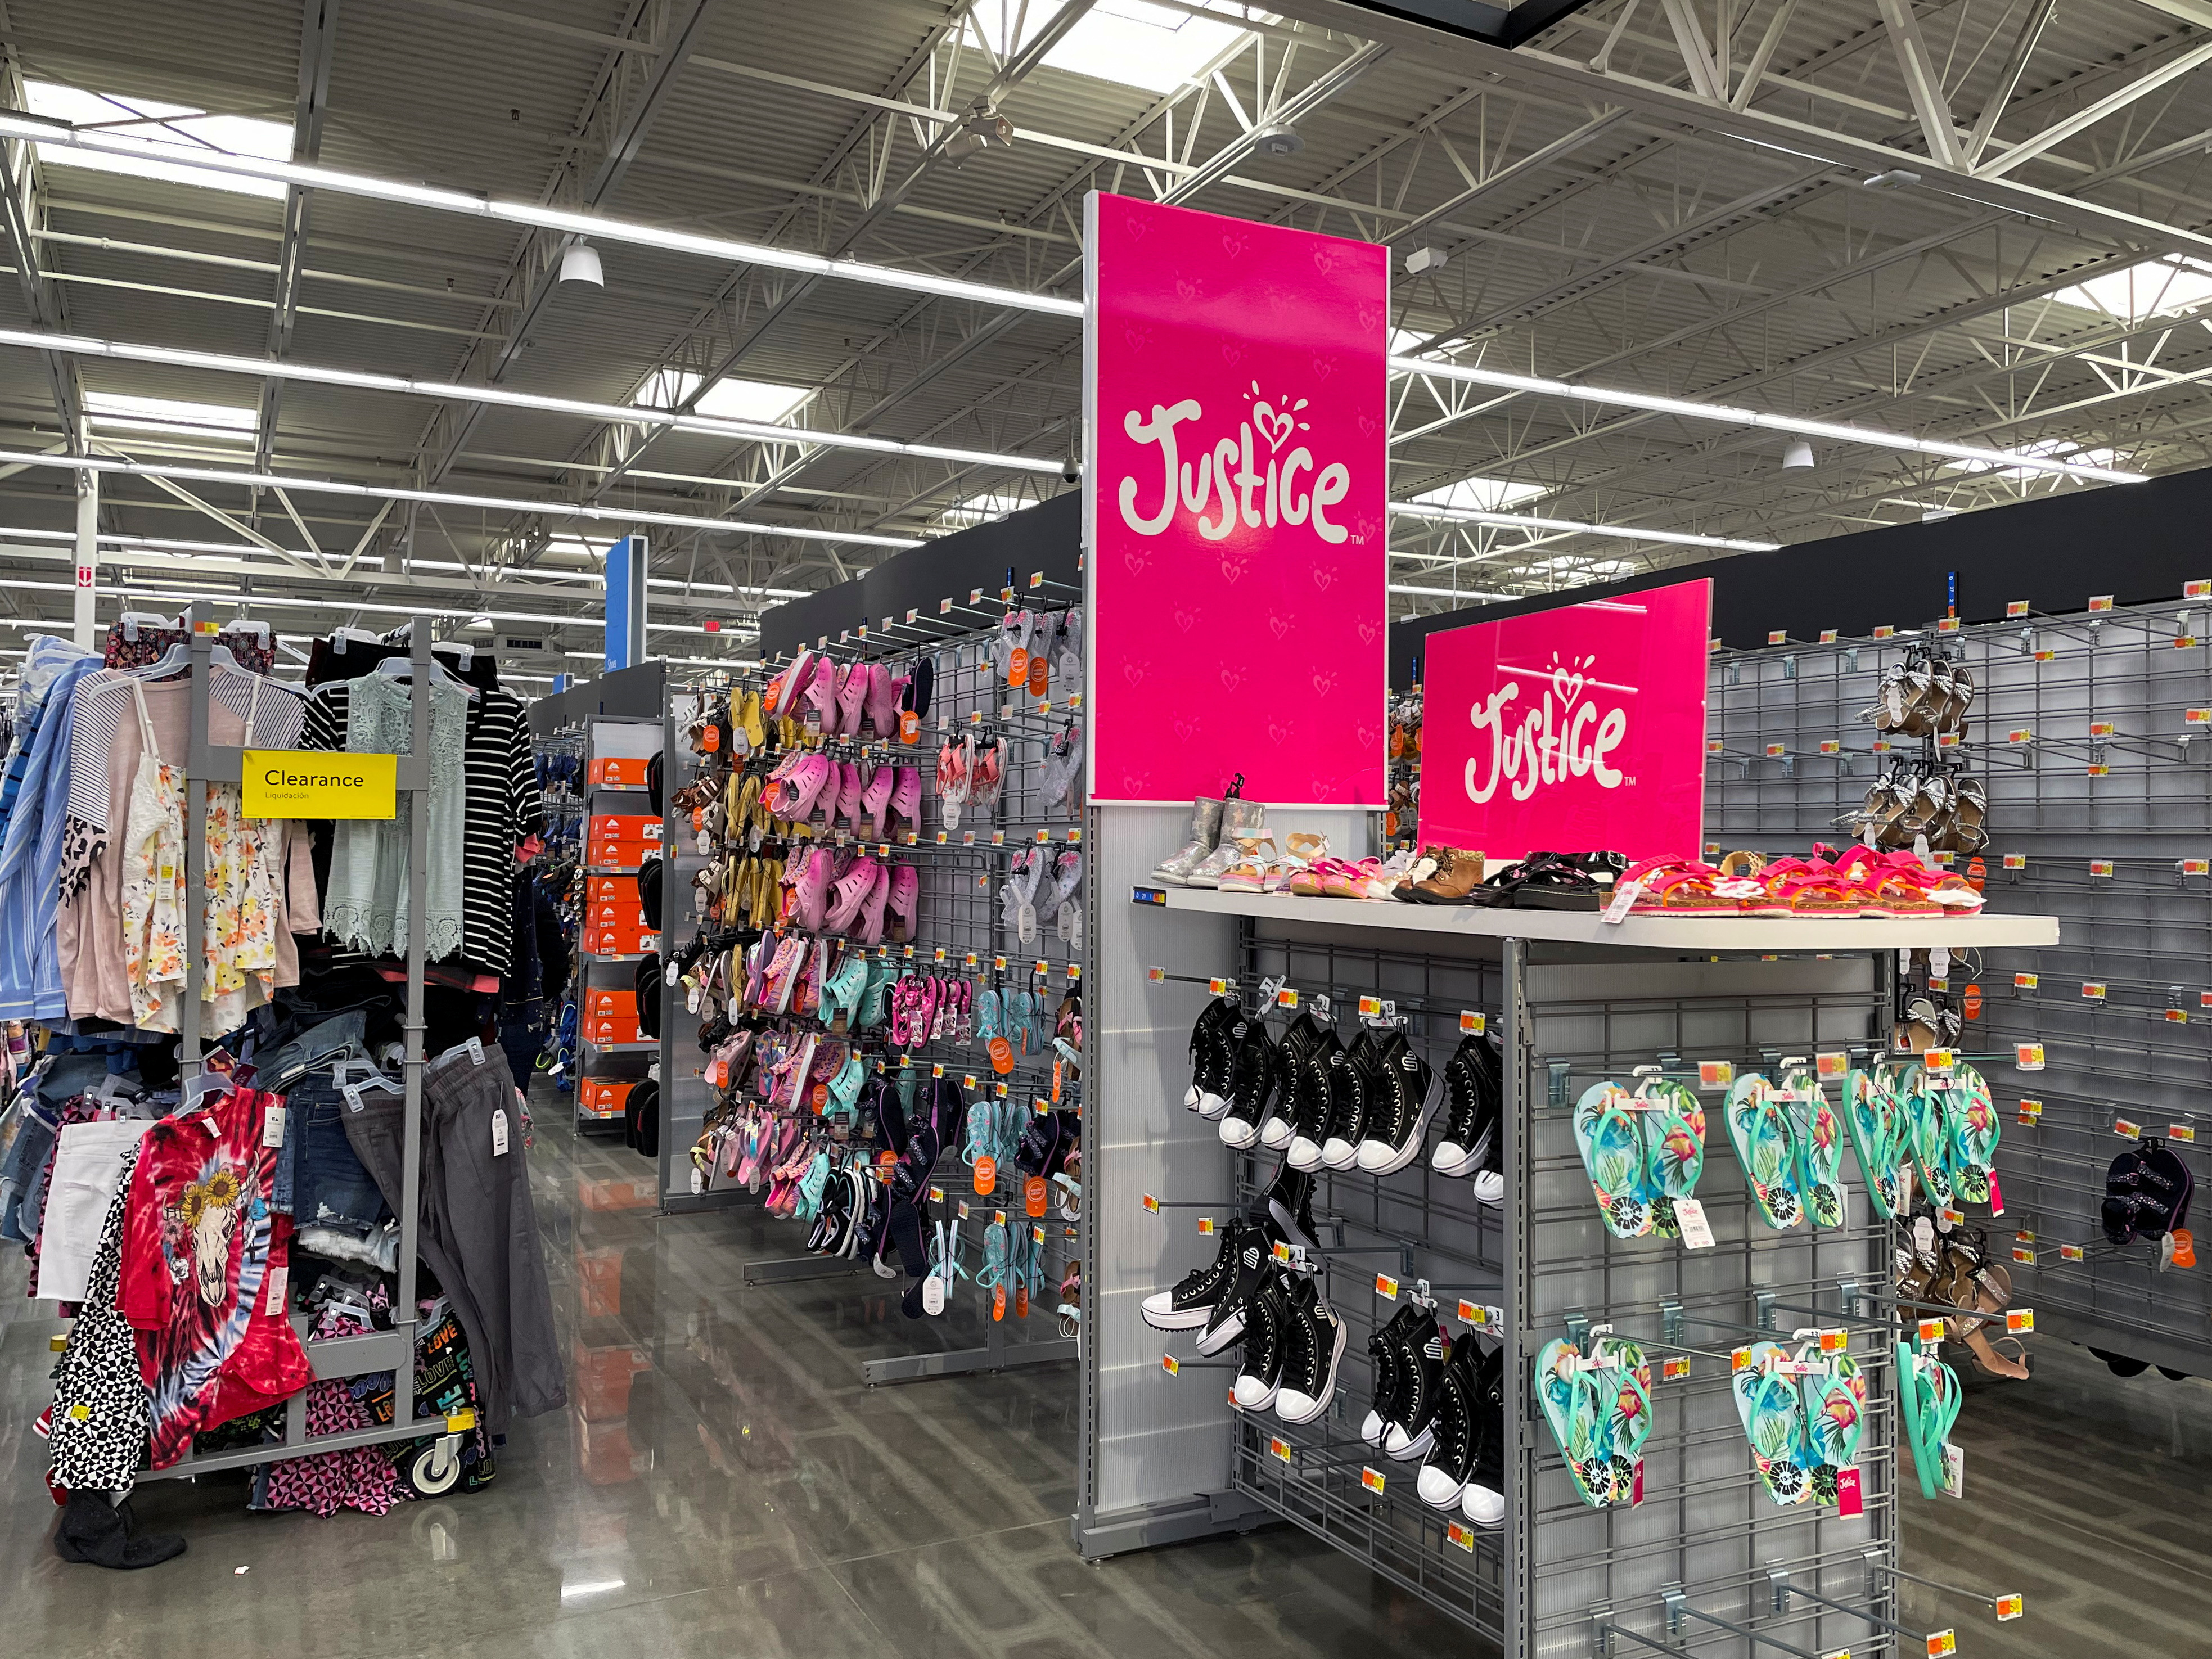 Walmart's Head of Fashion Talks About Changing its Staid Image in Fashion